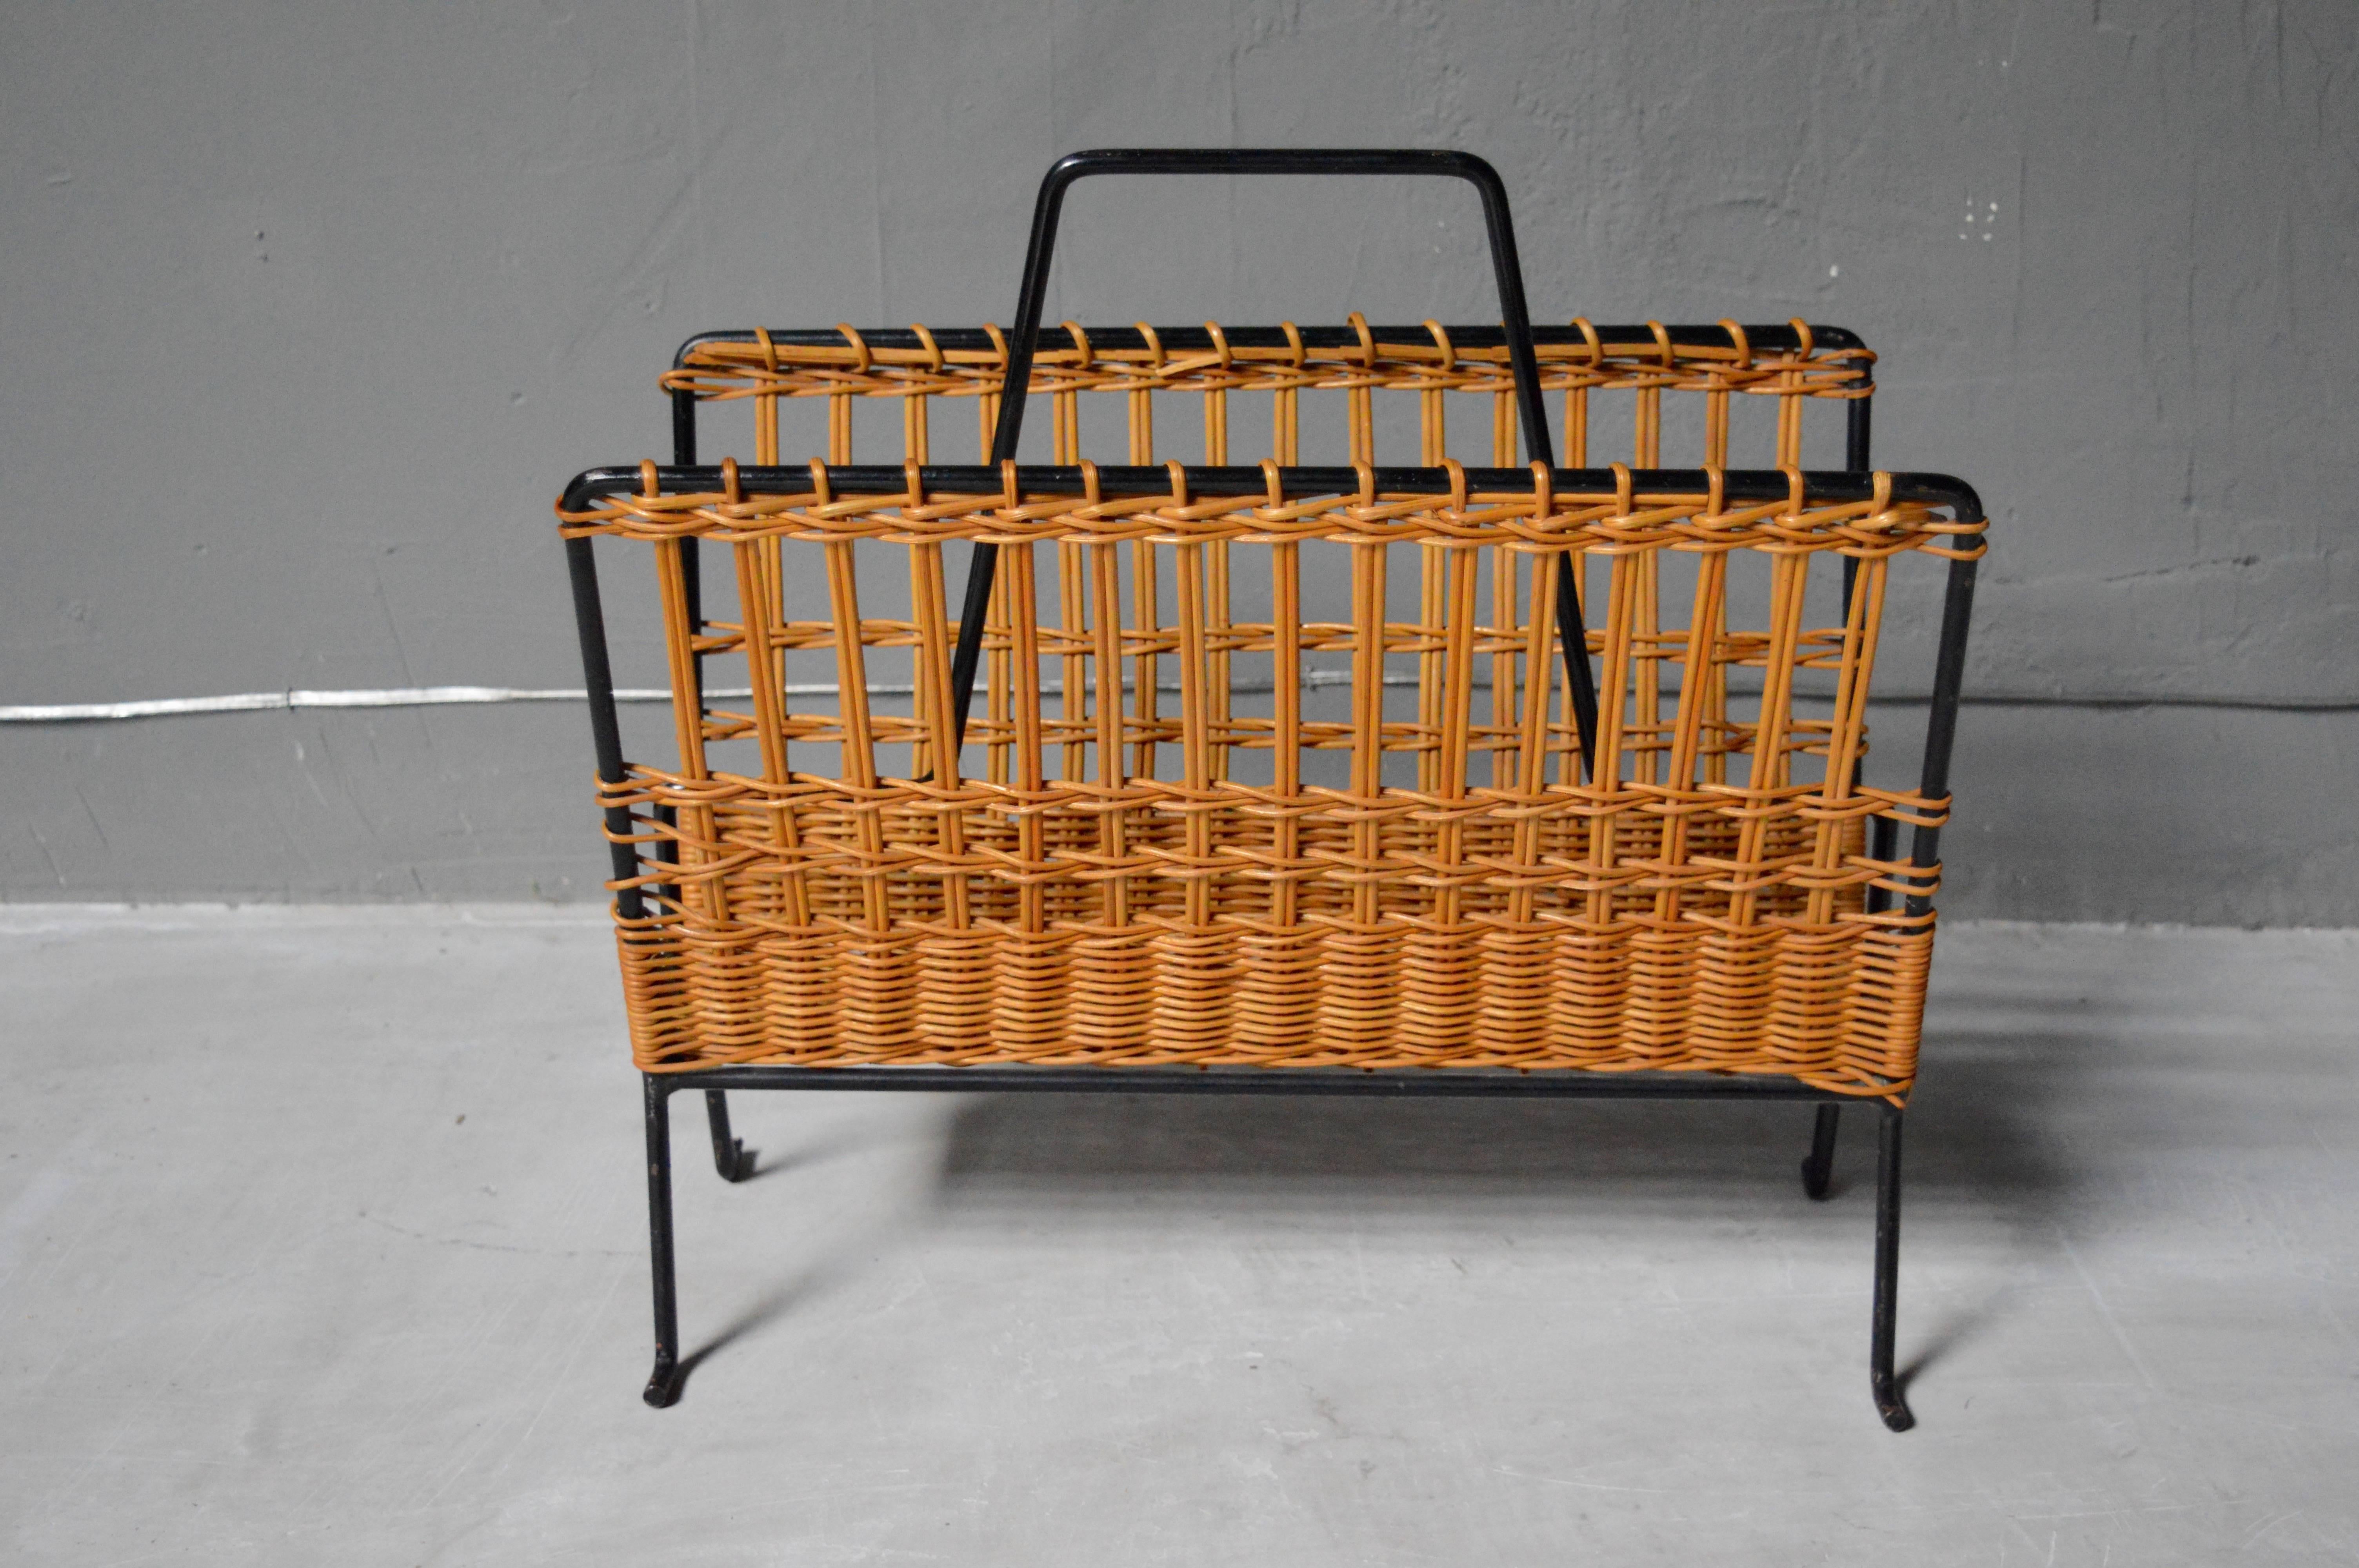 Handsome French magazine rack made of woven rattan with an iron frame. Very sturdy. Excellent vintage condition.